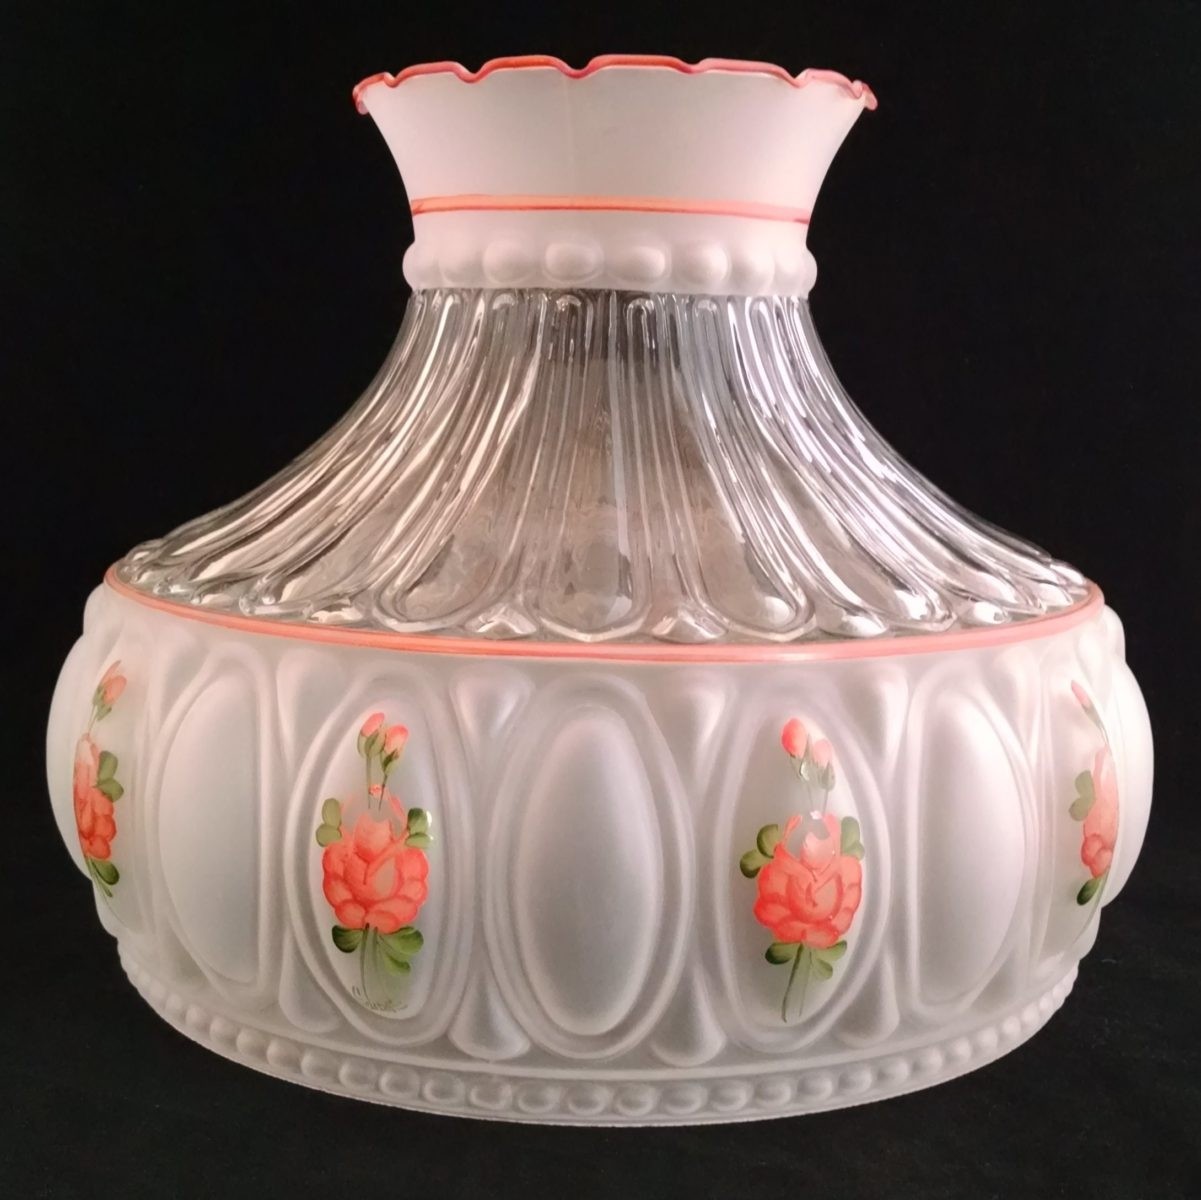 Aladdin lamp pink rose glass shade part m751 imperial